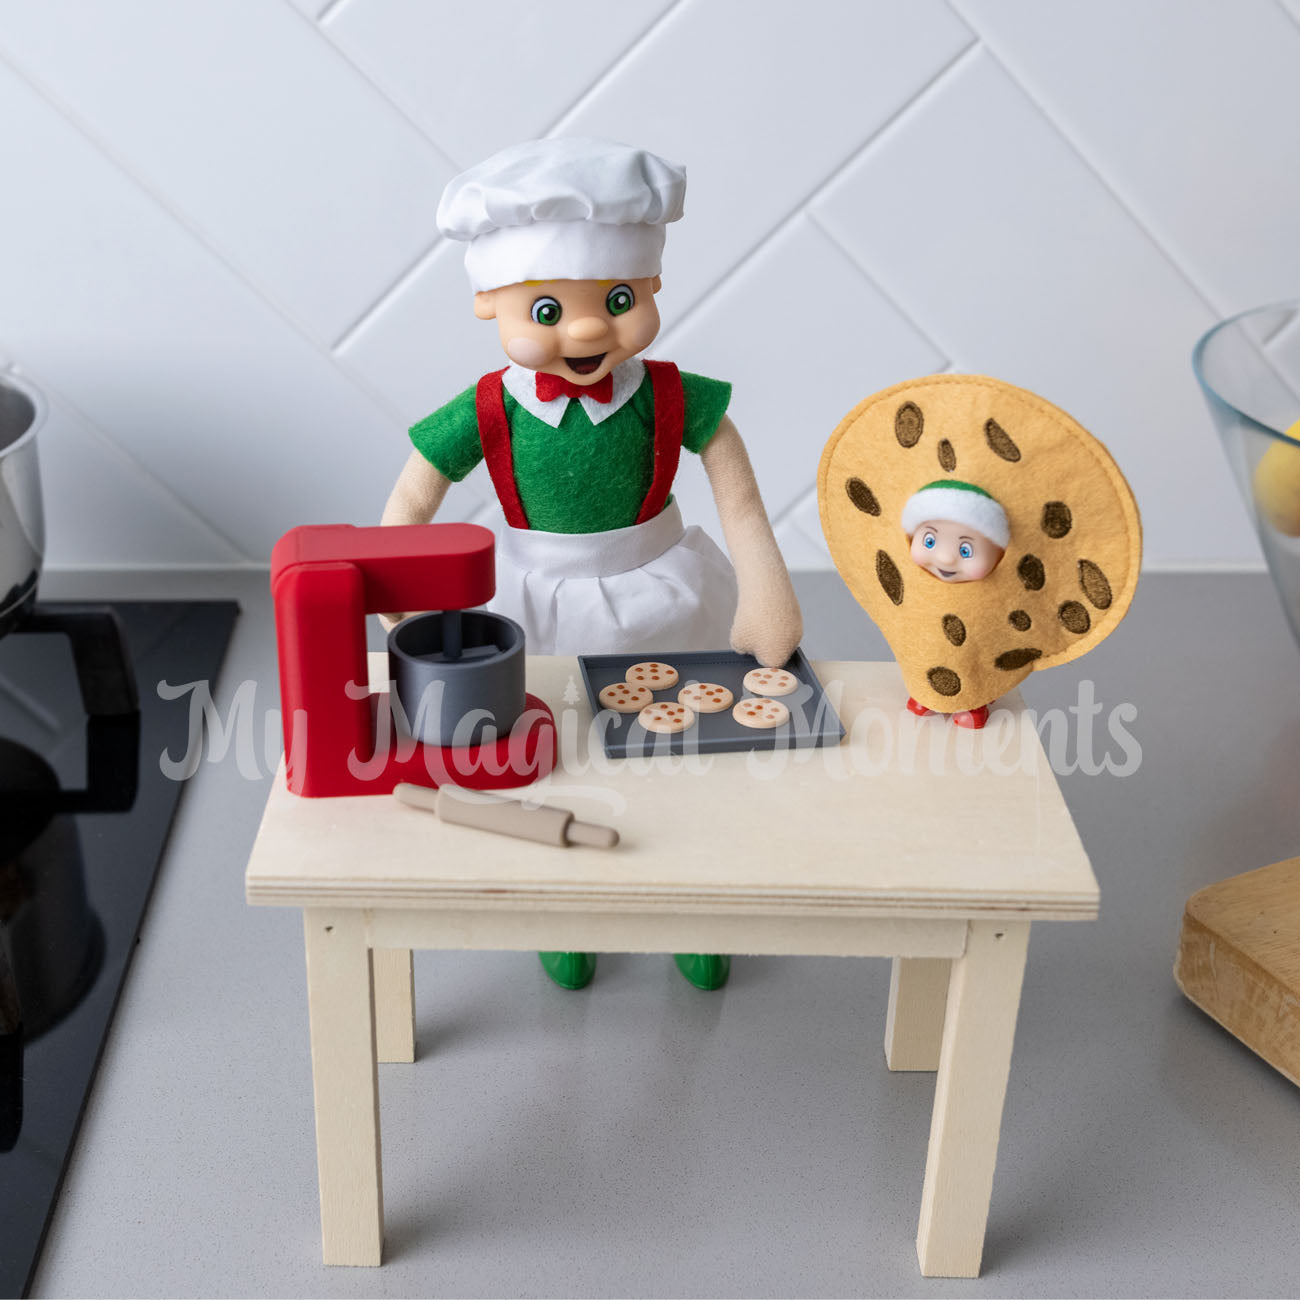 elf wearing a chef costume, cooking with a mini baking set and baby elf wearing a cookie costume